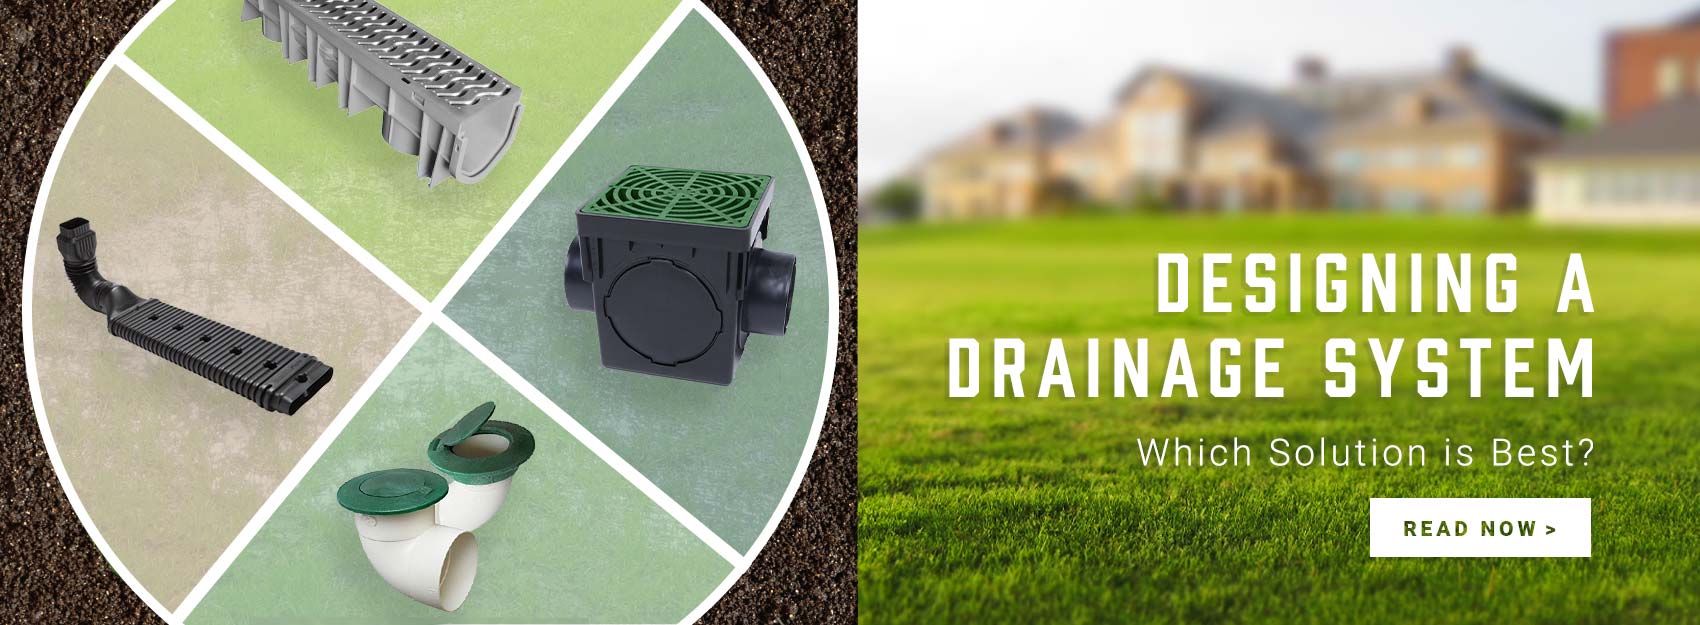 Designing a Drainage System - Read Now